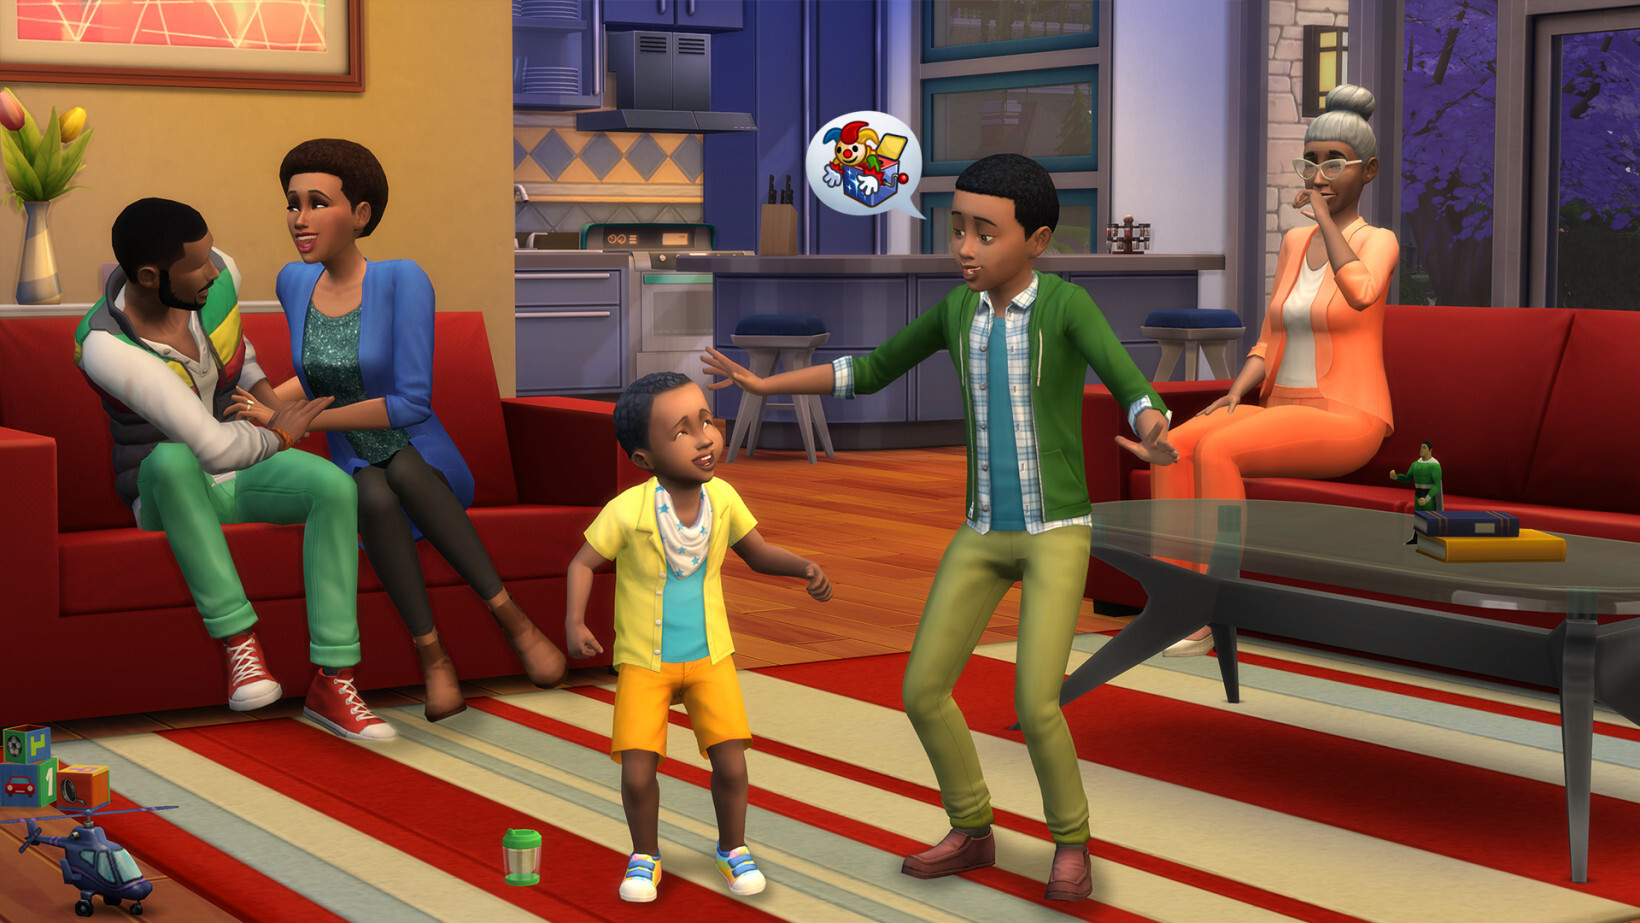 PANIC: You have until May 28 to download The Sims 4 for FREE